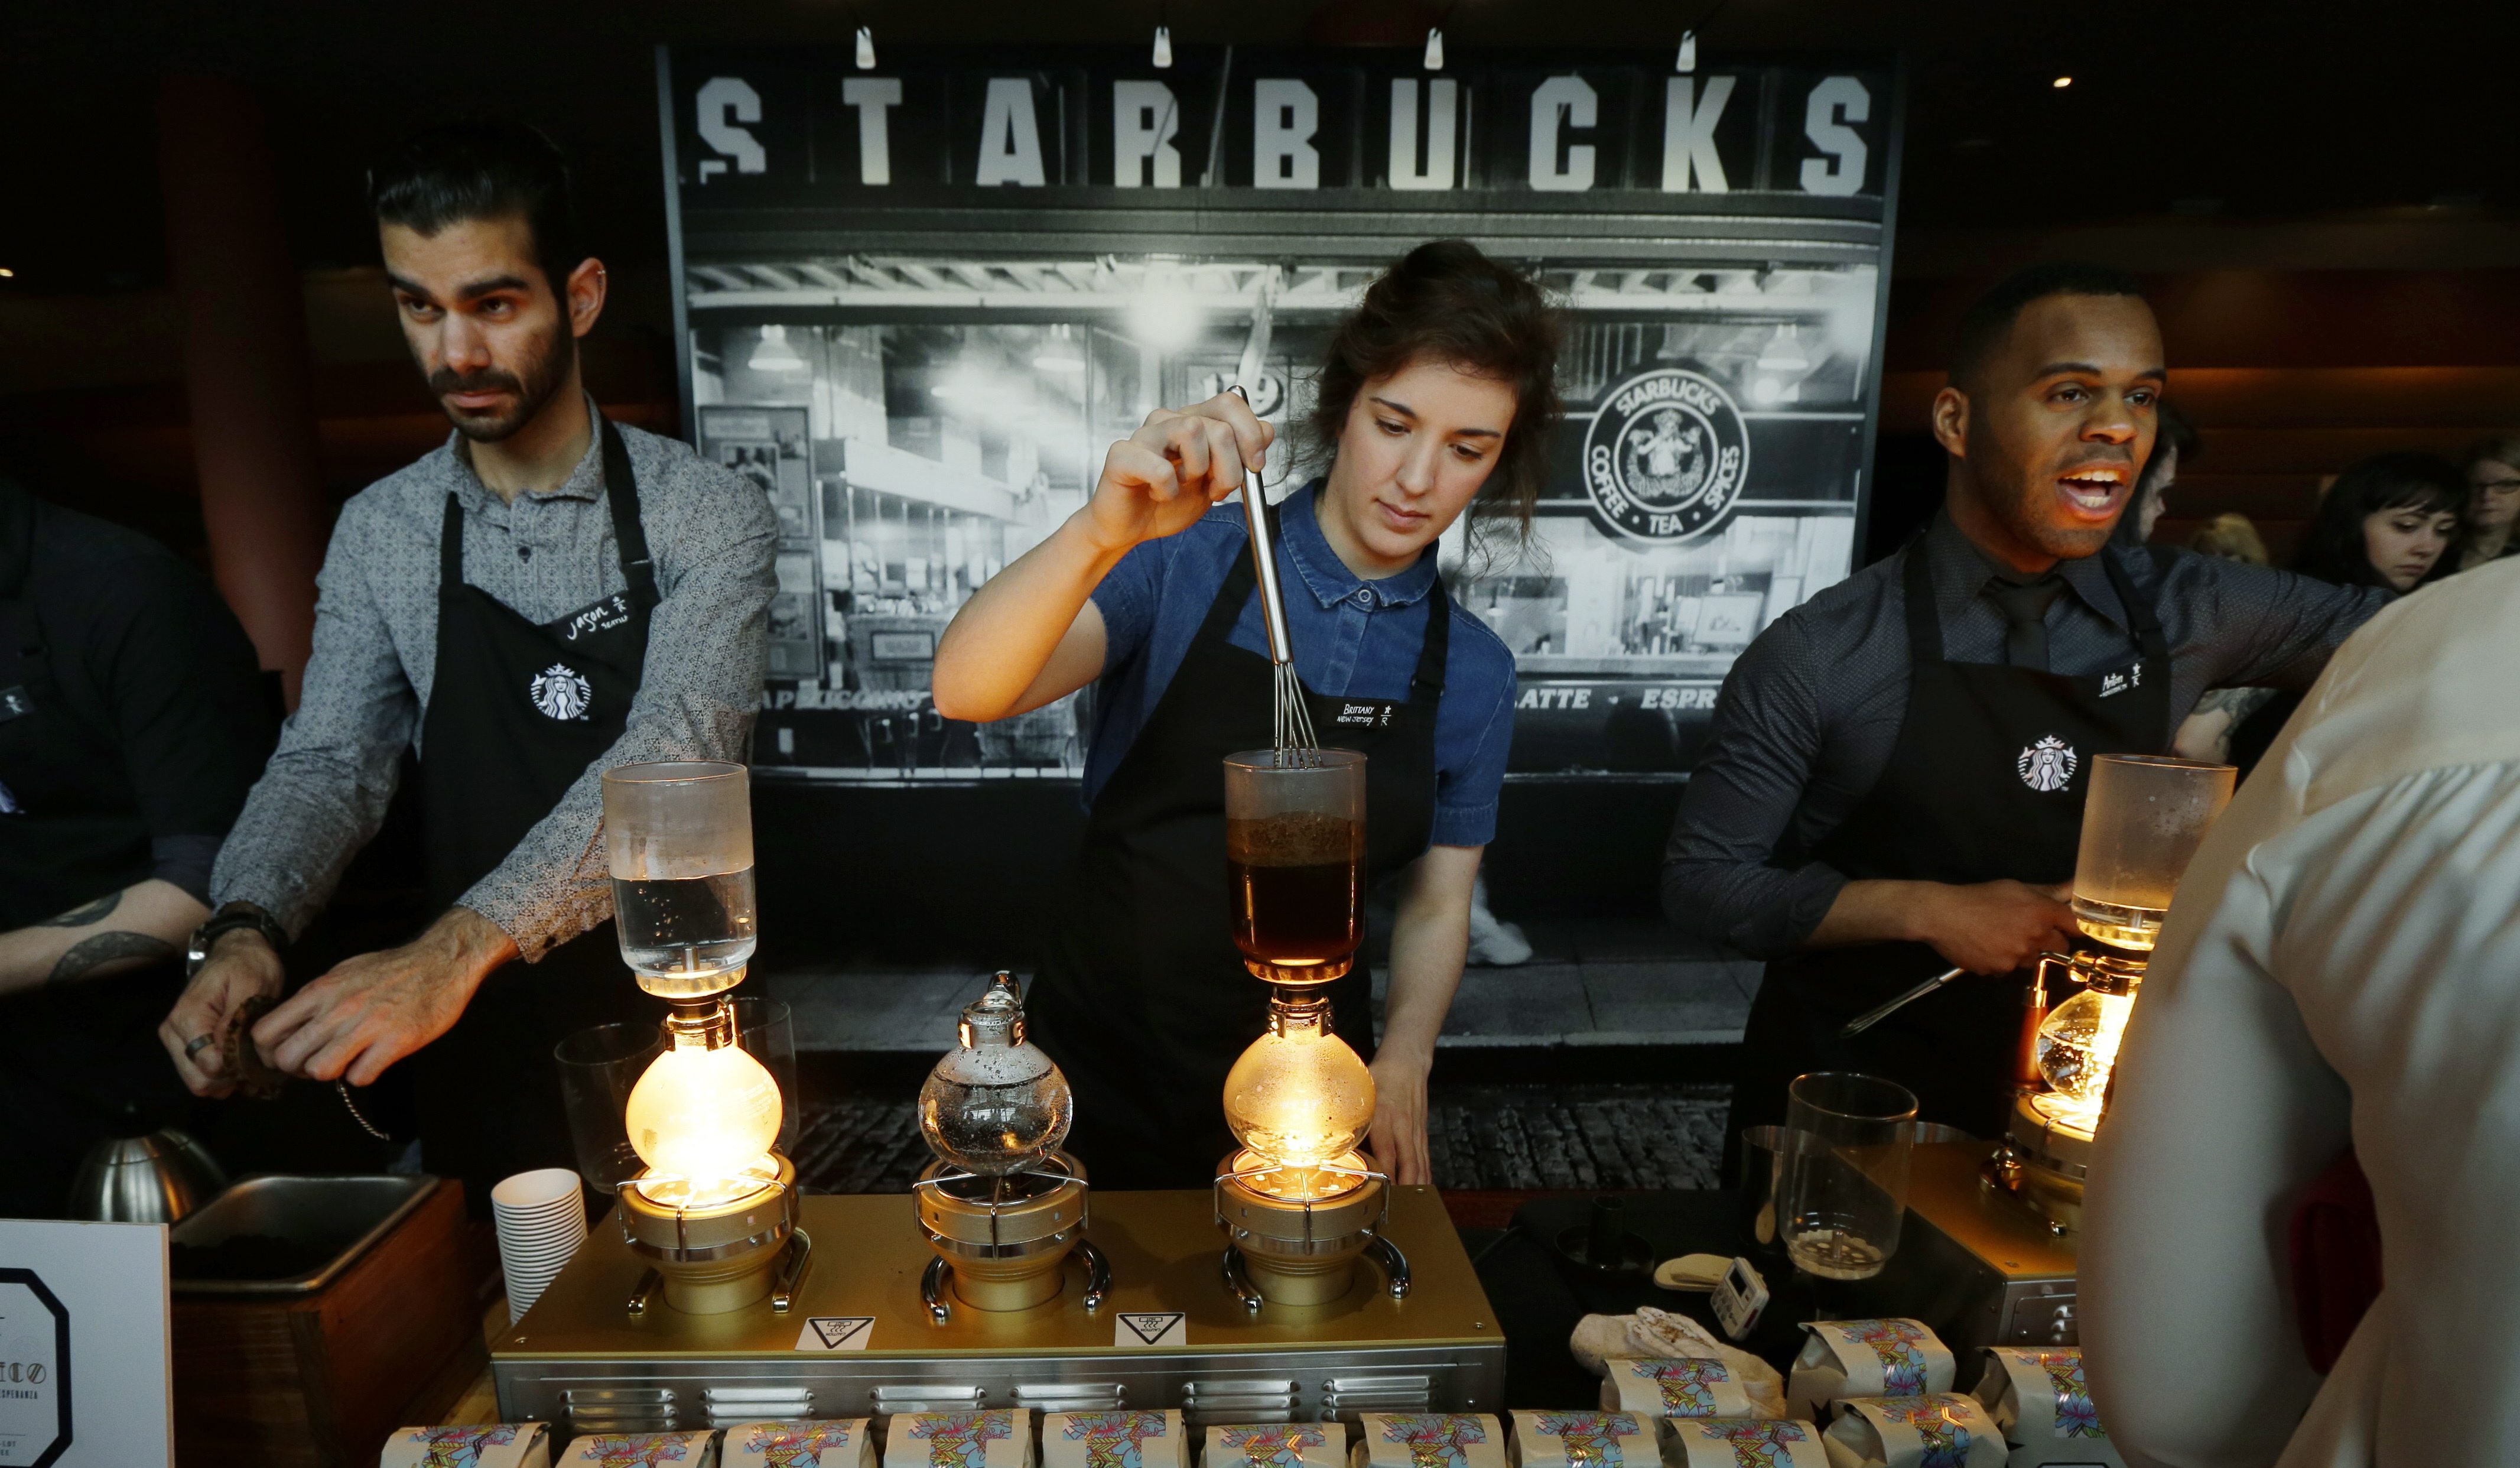 As Starbucks works to overhaul its rewards program, some customers may be looking to take their money elsewhere.